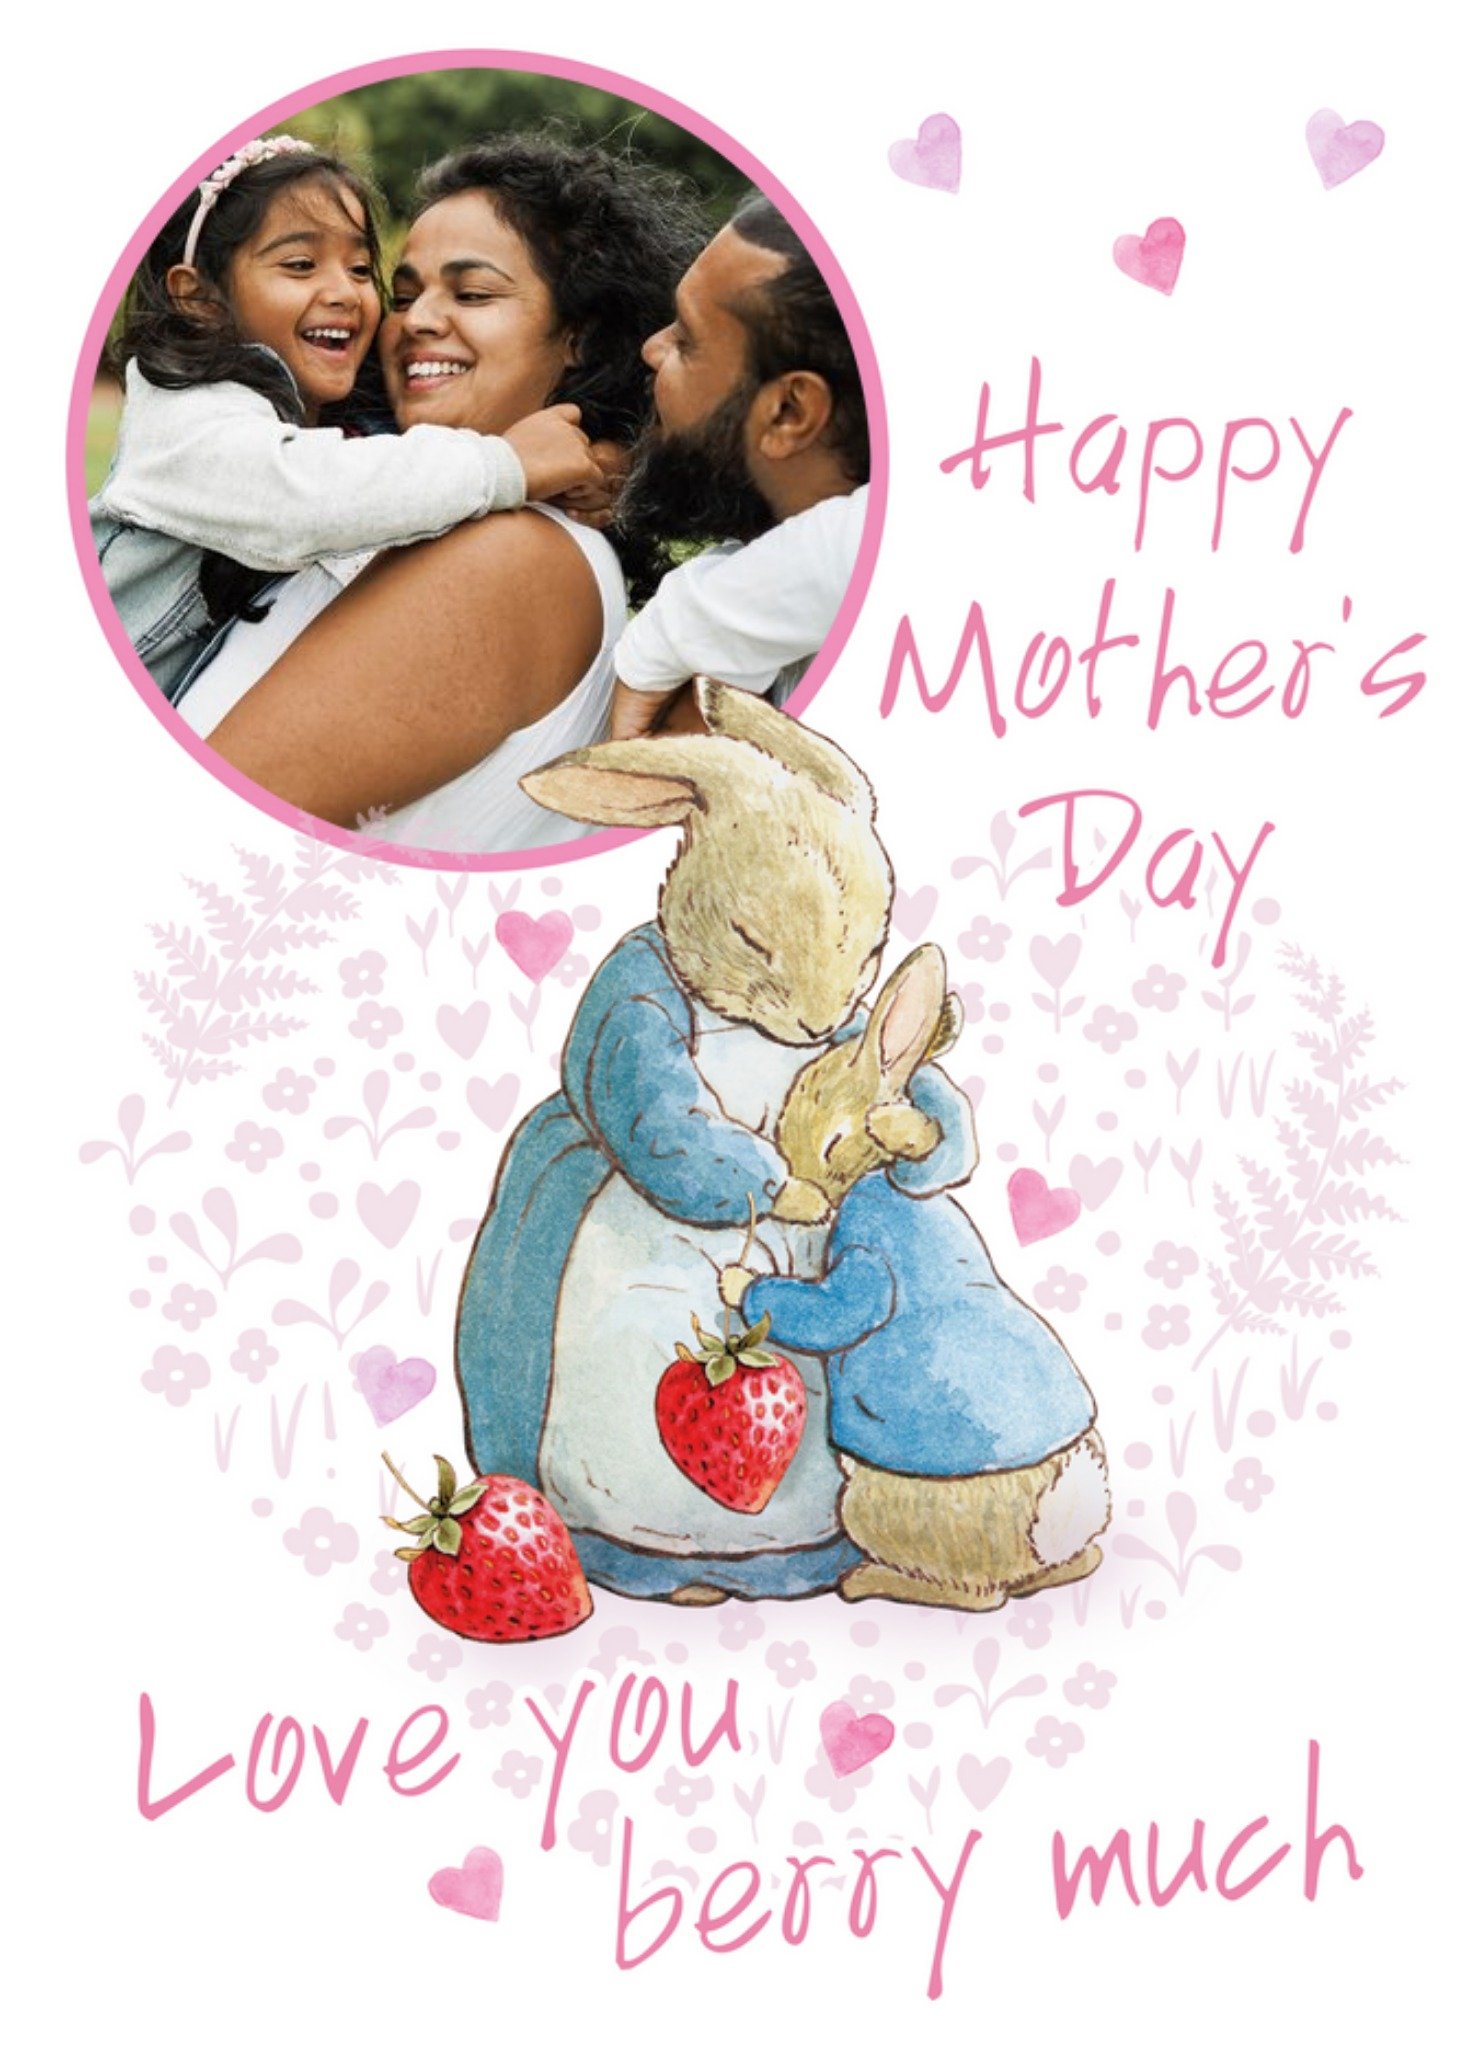 Peter Rabbit Happy Mothers Day Love You Berry Much Photo Upload Card Ecard